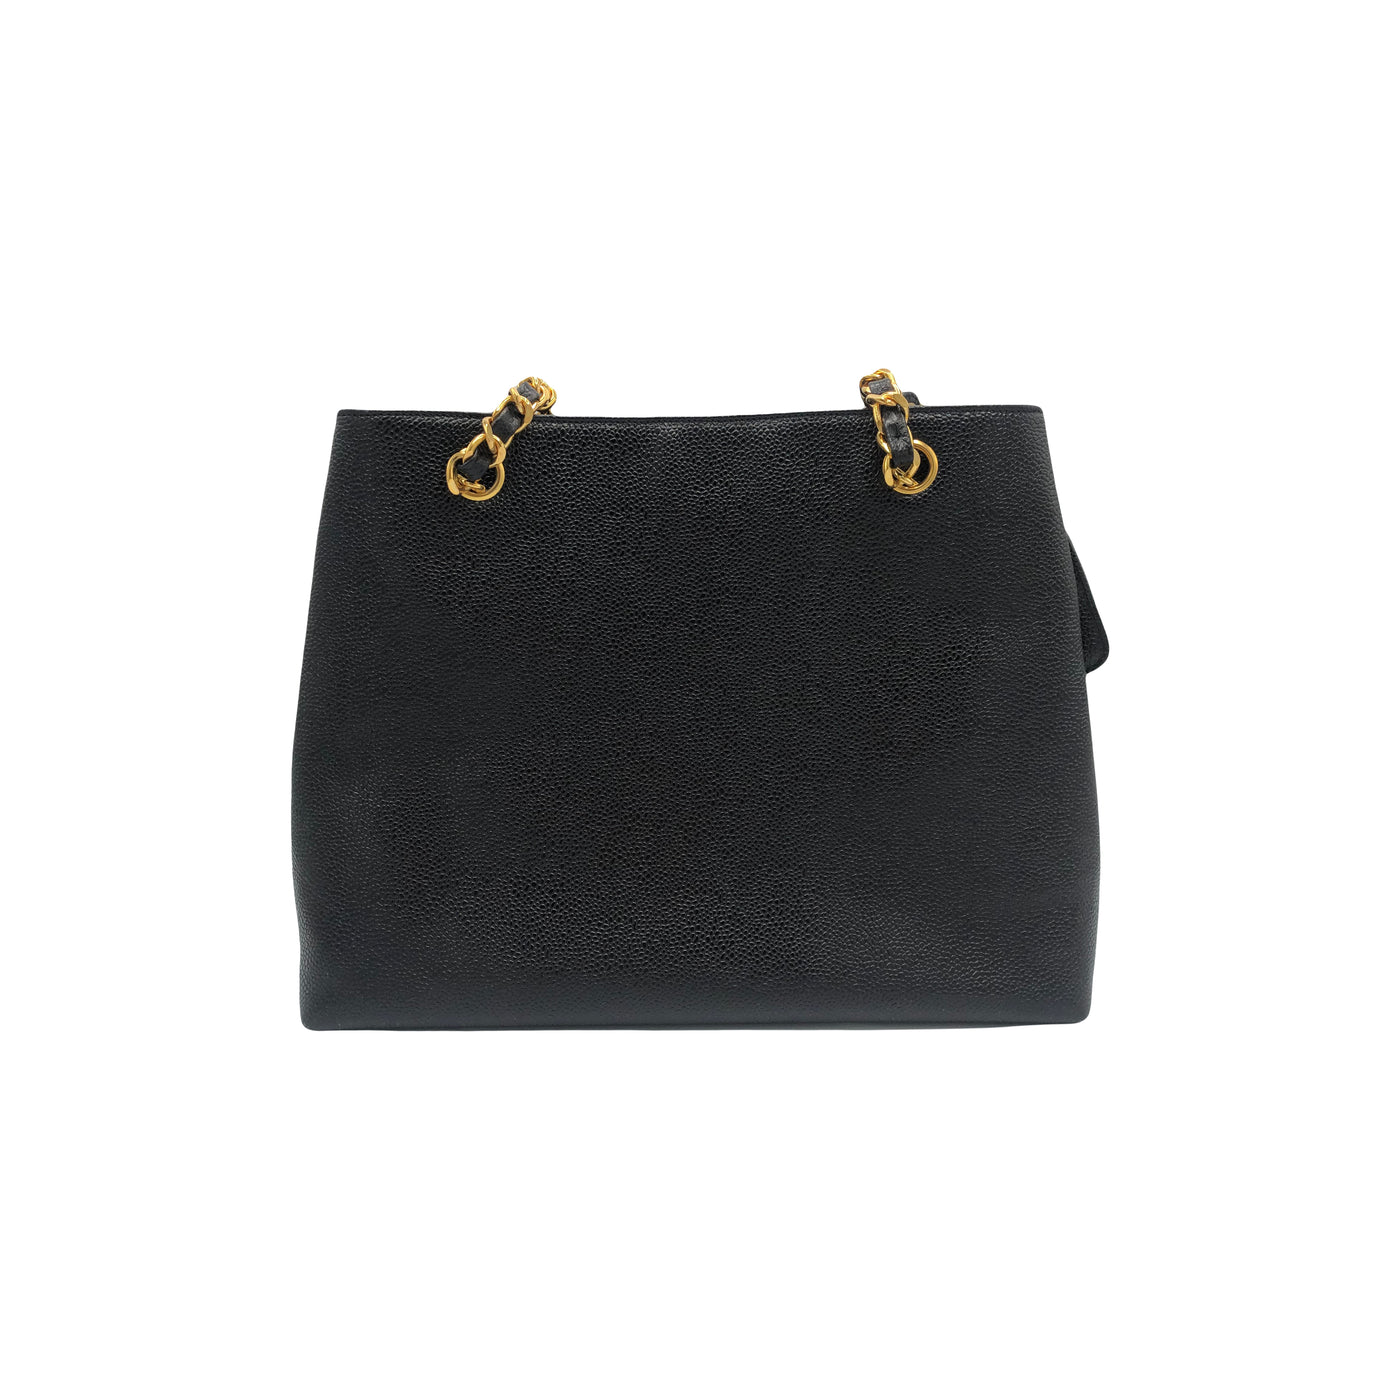 Valenti Designer Flap Black Leather Crossbody Bag With Gold Hardware,  Luxury Womens Shoulder Black Leather Crossbody Bag, Leather Strap, Black  Calfskin Handbag With Studs Chain, Small Purse. From Jaquemus_bags, $141 |  DHgate.Com